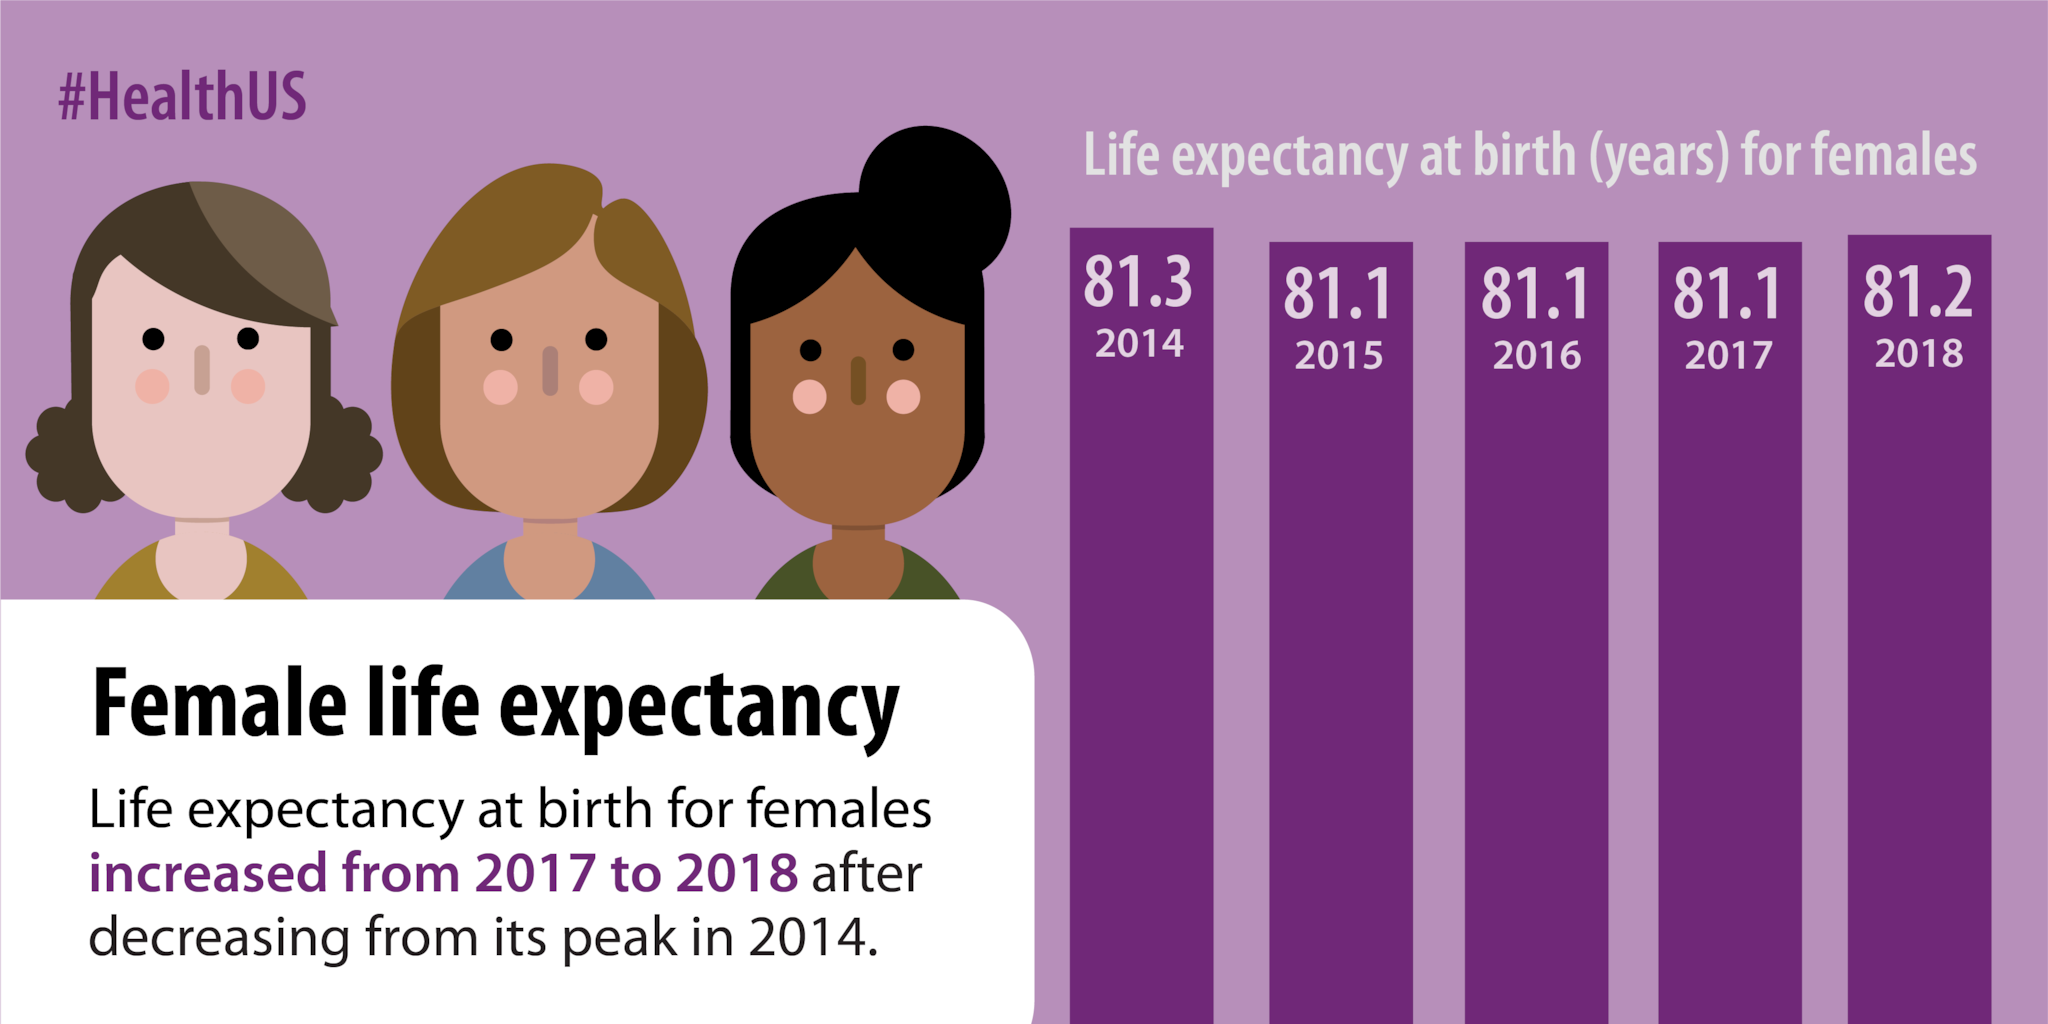 Life expectancy at birth for females increased from 2017 to 2018 after decreasing from its peak in 2014.